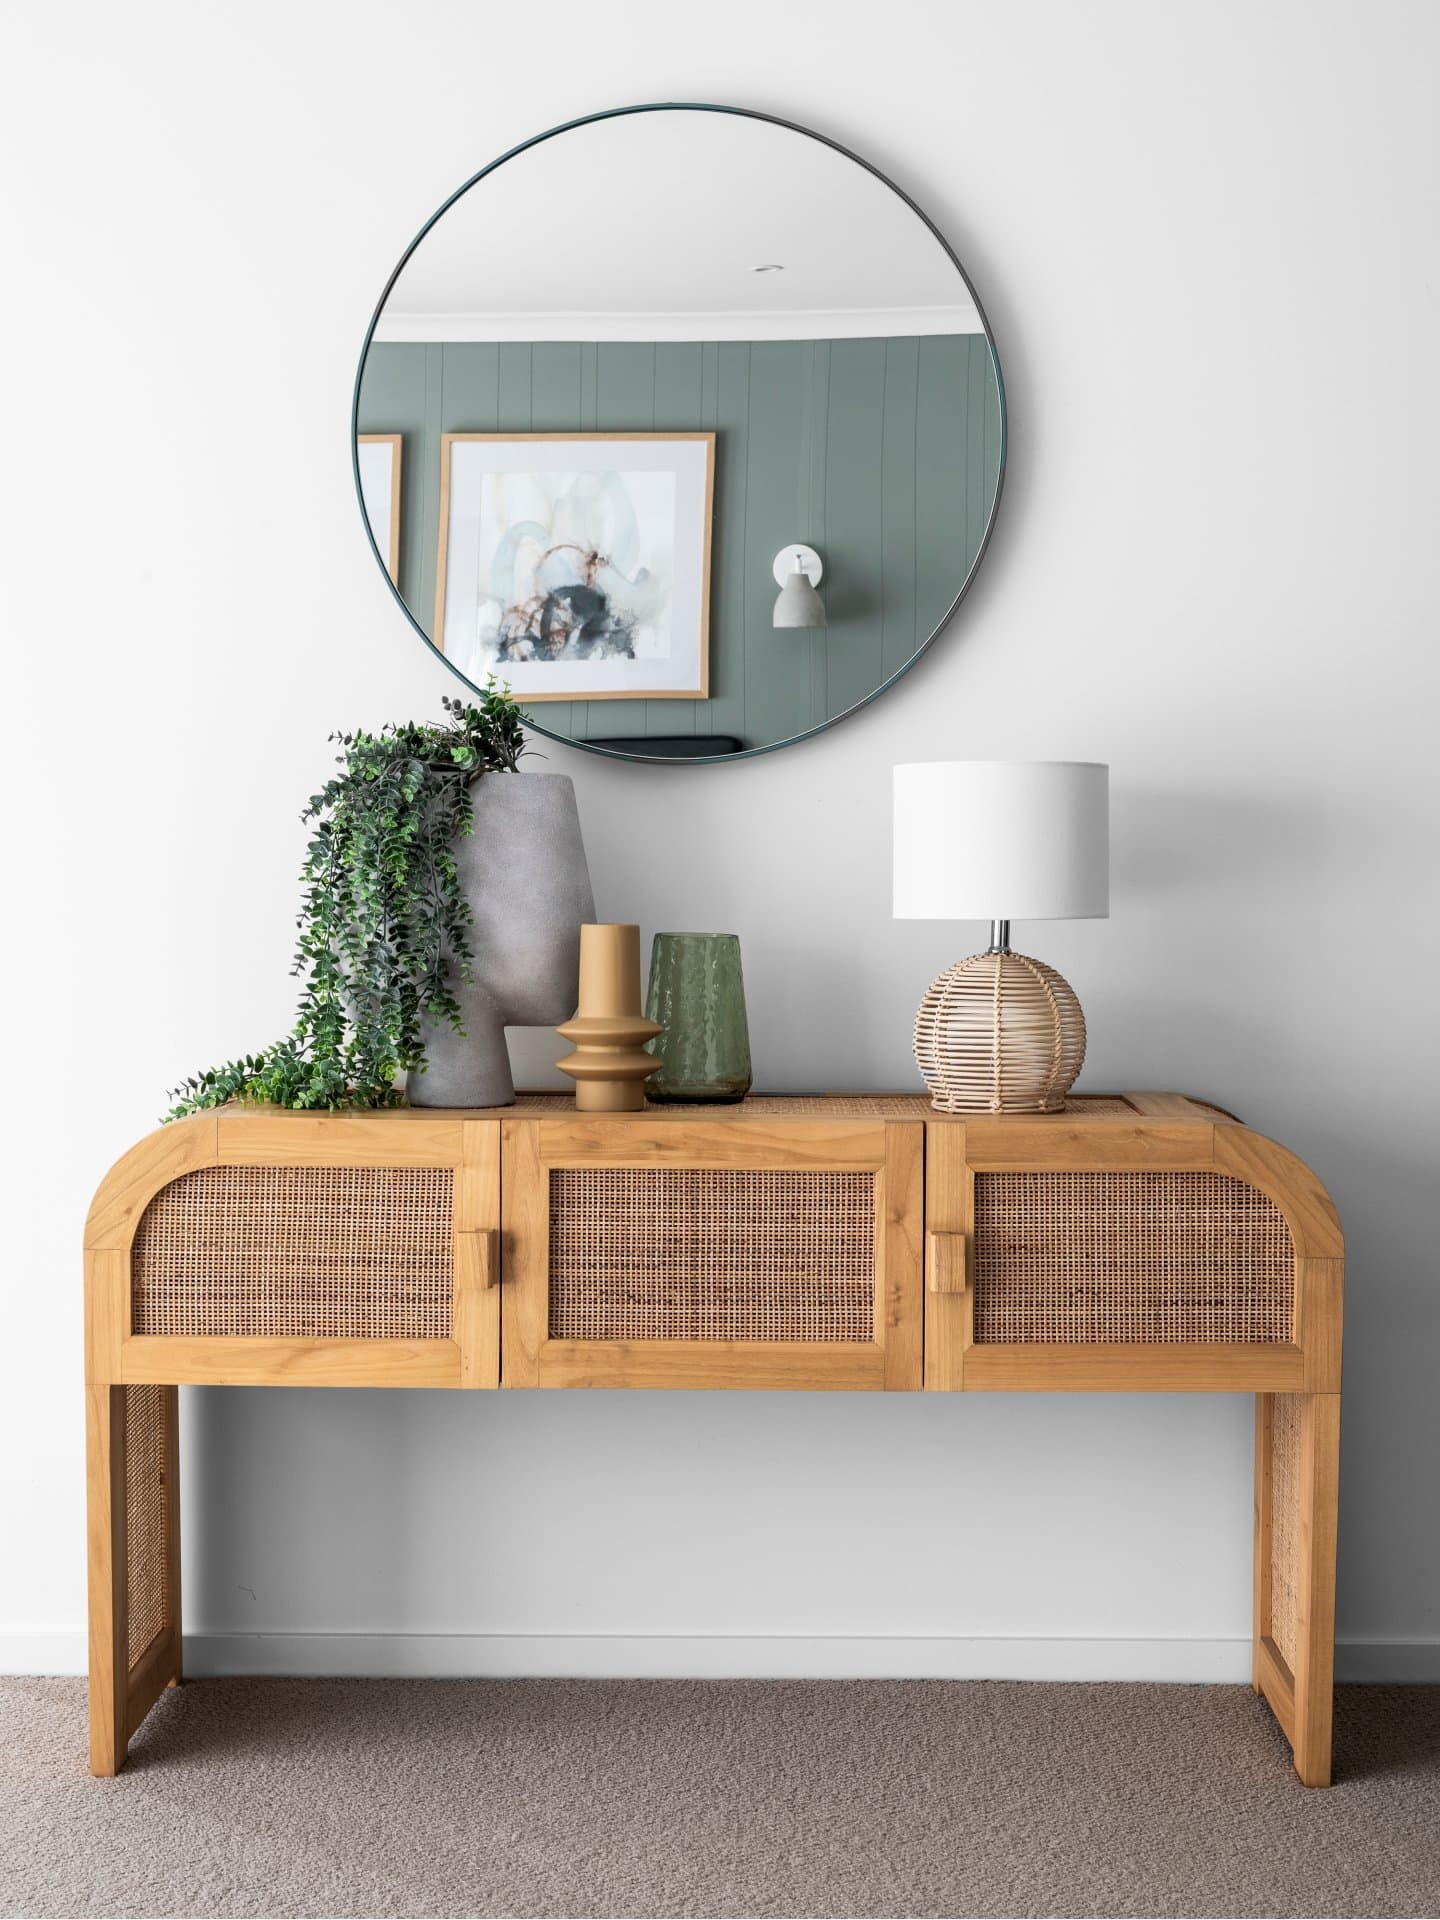 rattan curved console table with round mirror above styled with coastal table lamp and concrete vase